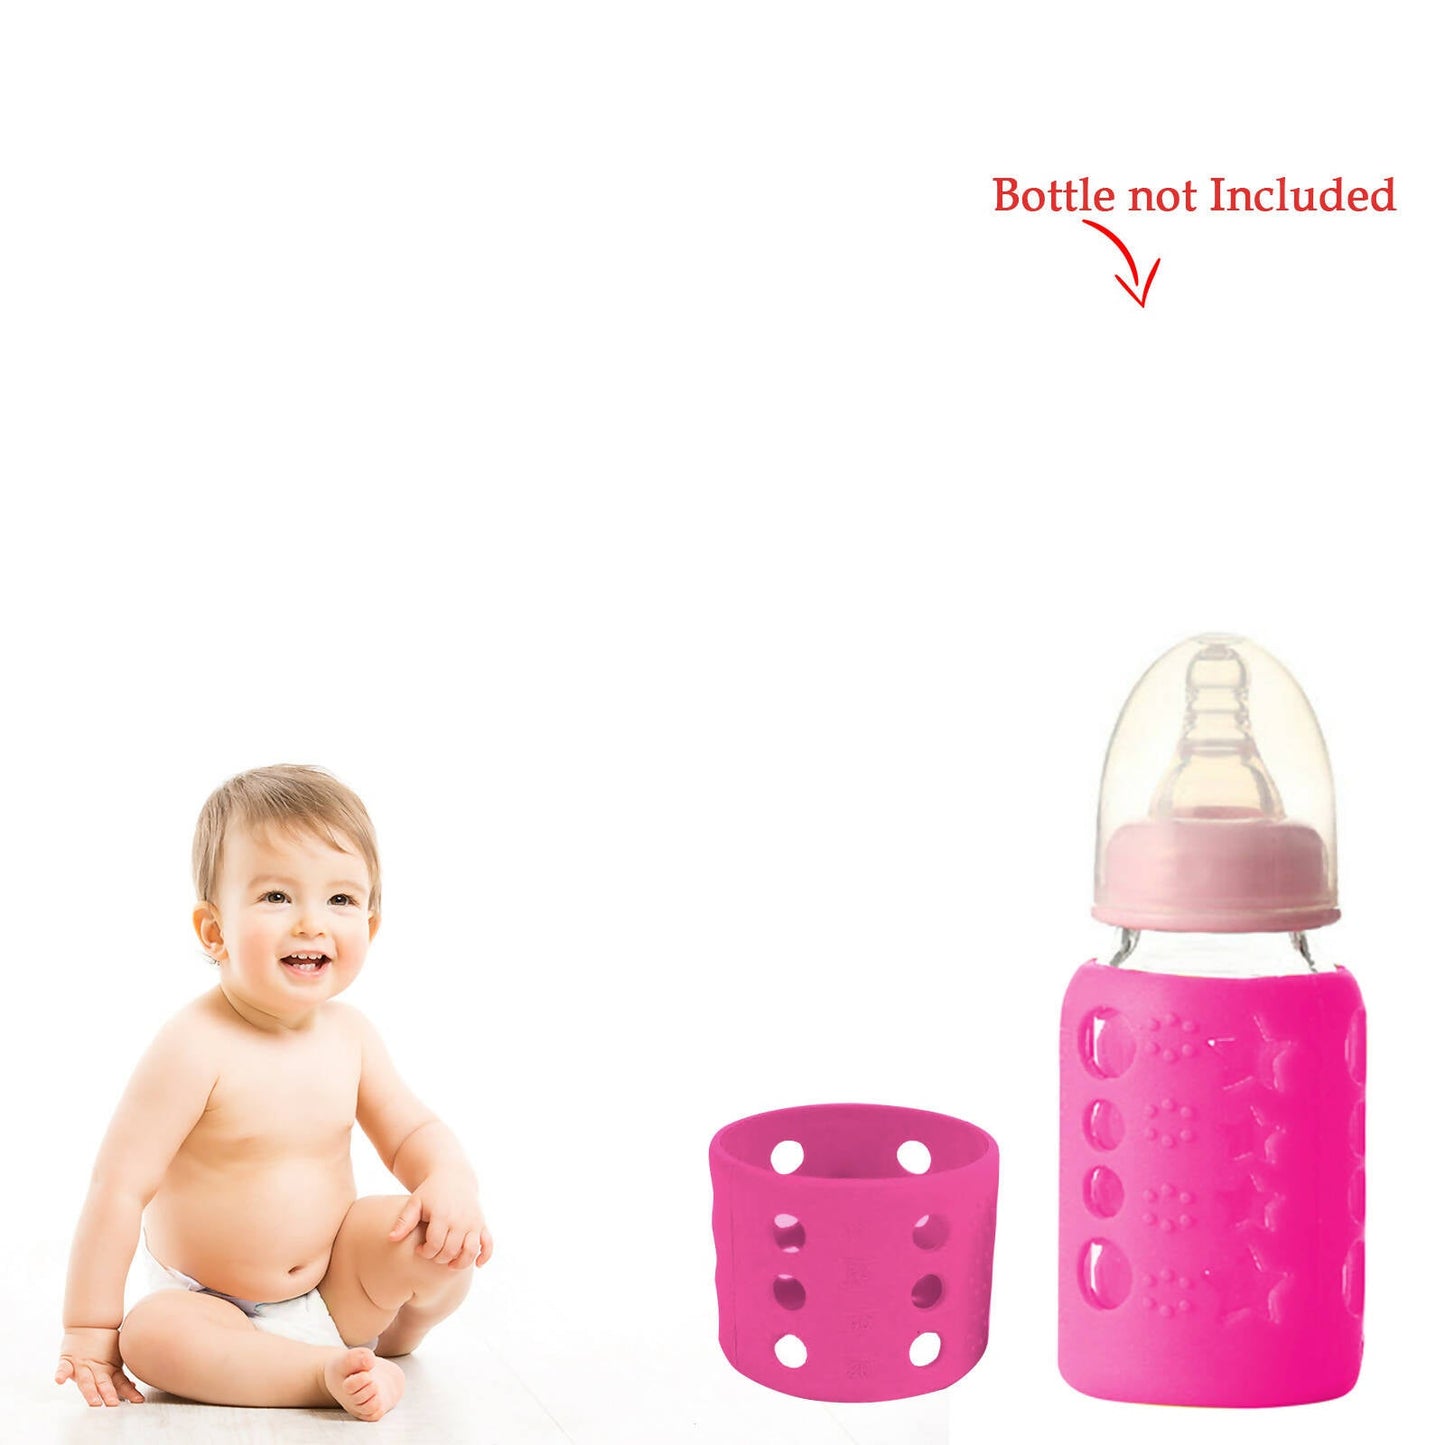 Safe-O-Kid Silicone Baby Feeding Bottle Cover Cum Sleeve for Insulated Protection Small 60mL- Pink -  USA, Australia, Canada 